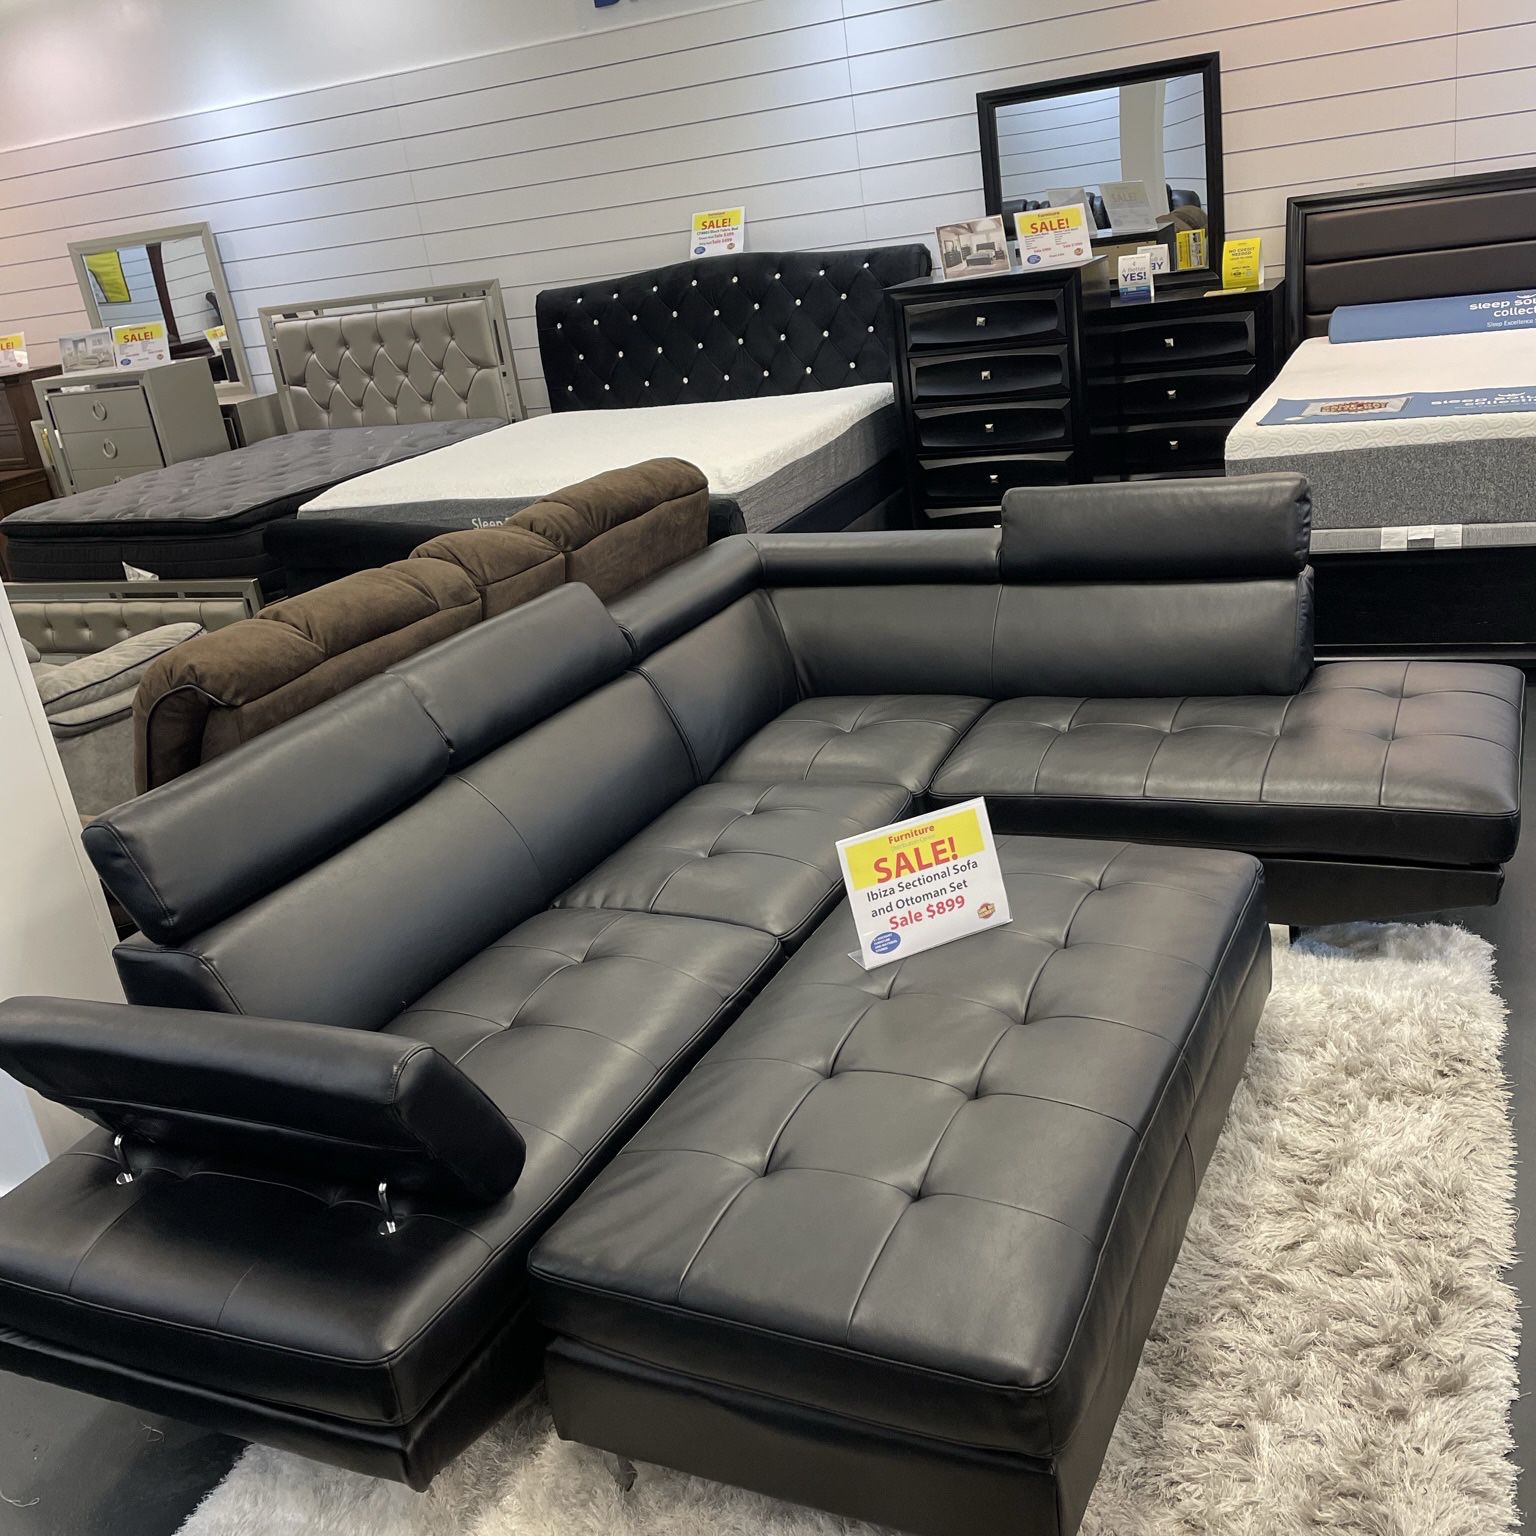 Spring Sale! Ibiza Black Sectional With Ottoman Only $799. Easy Finance Option. Same Day Delivery.